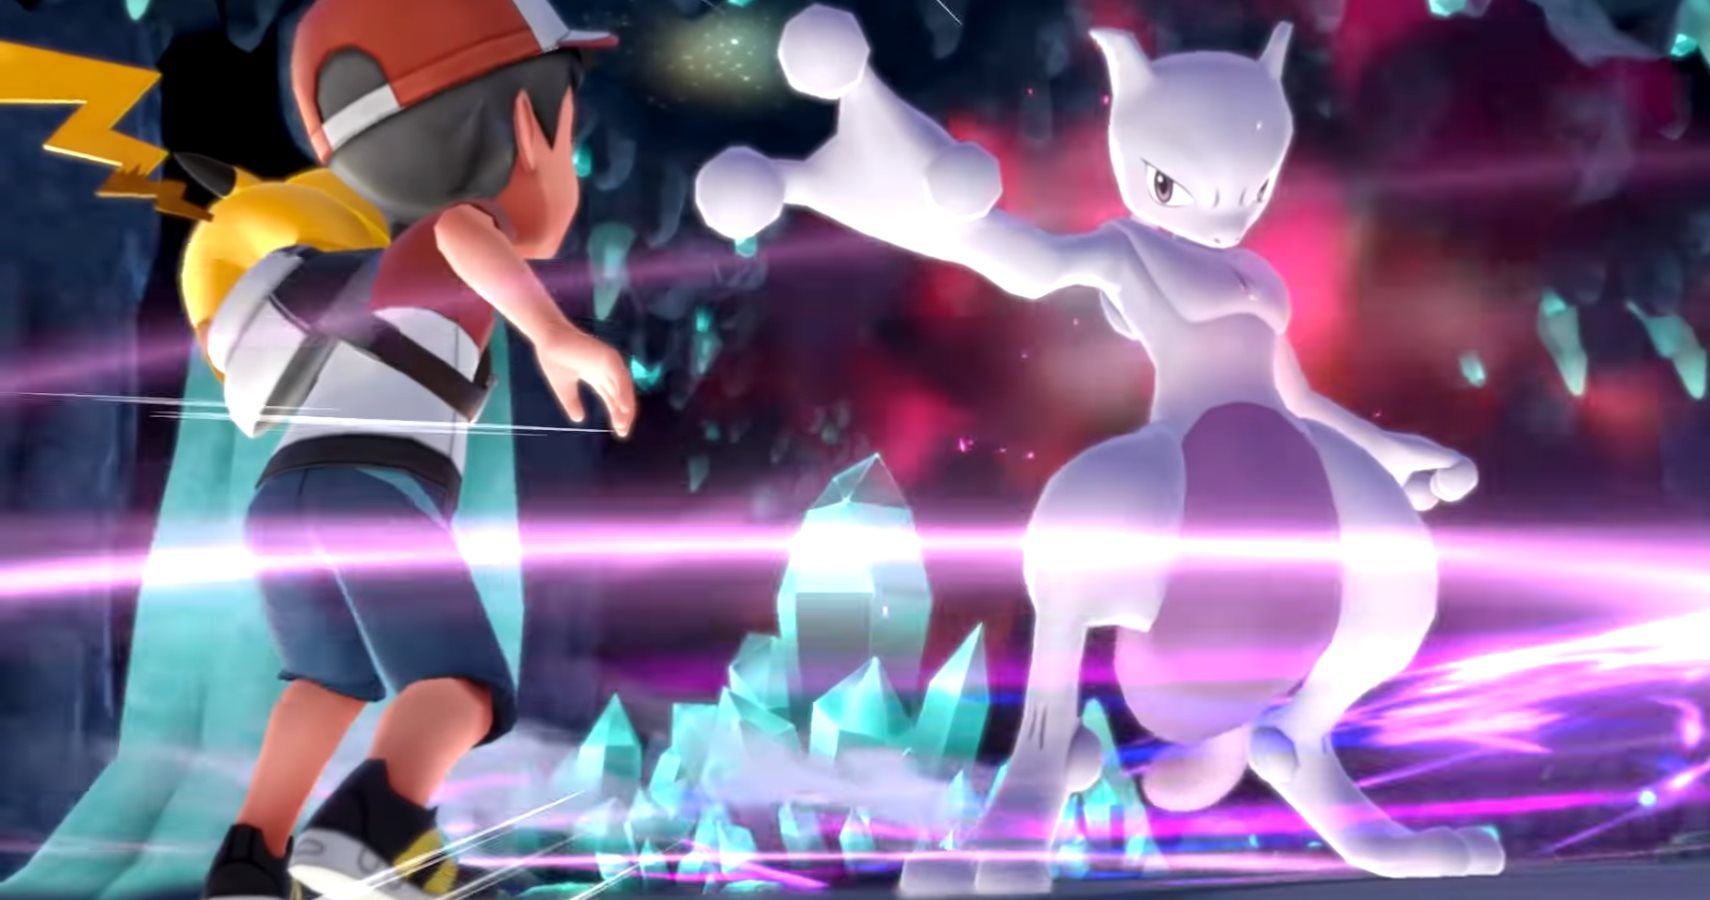 Mewtwo Makes An Appearance In New Pokémon Let's Go Trailer